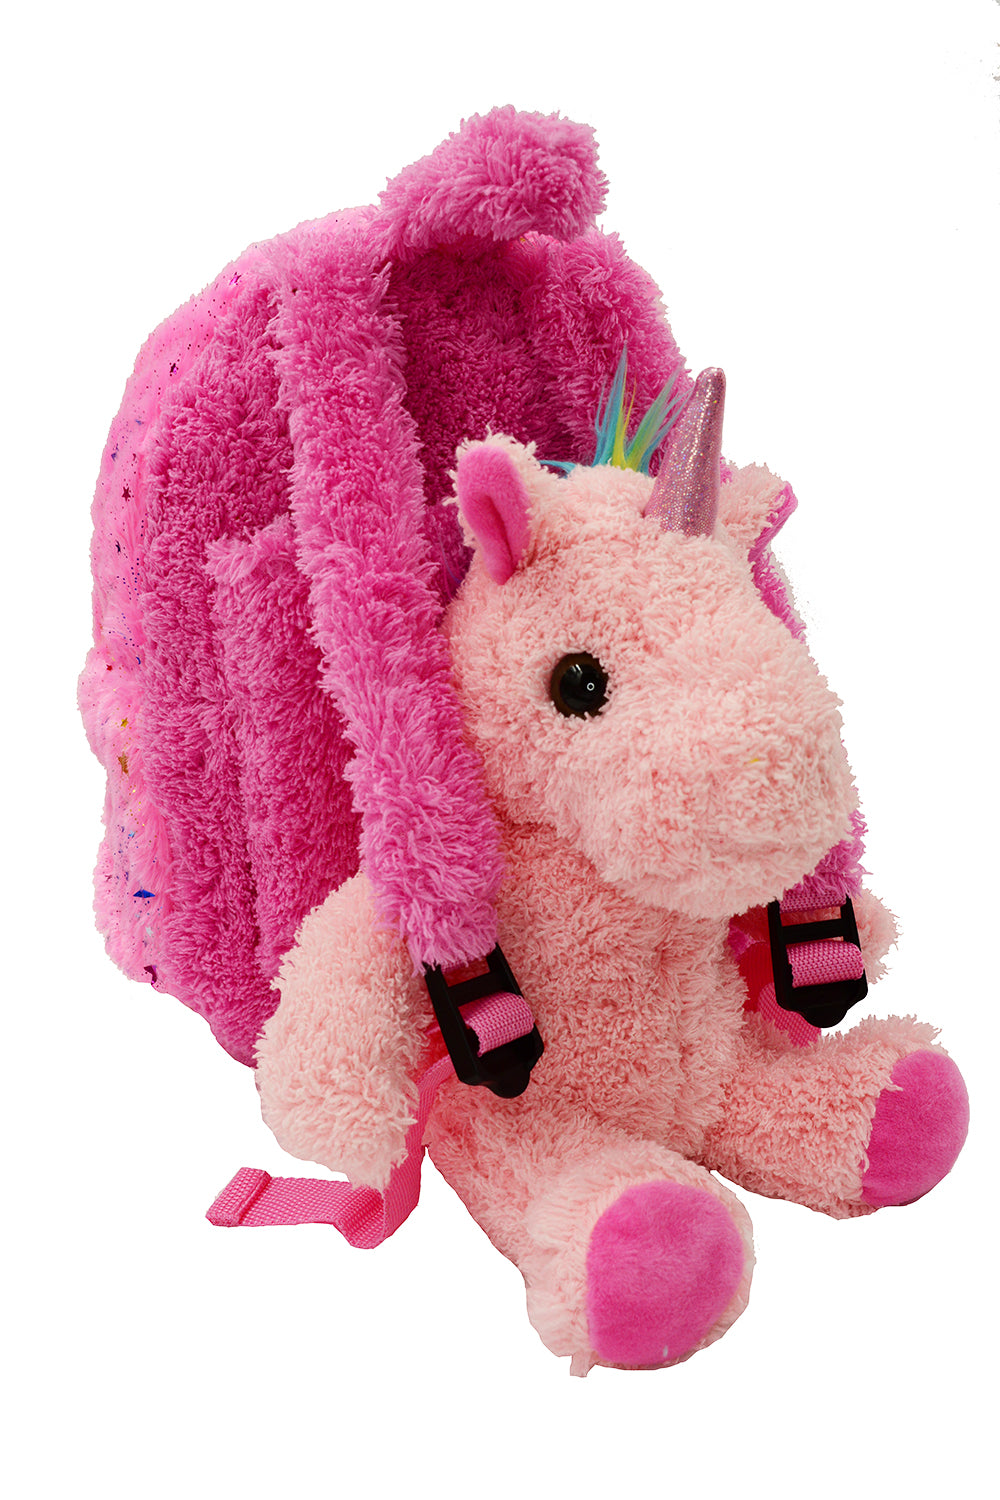 Sparkle Pink Unicorn PAL Arounds Backpack